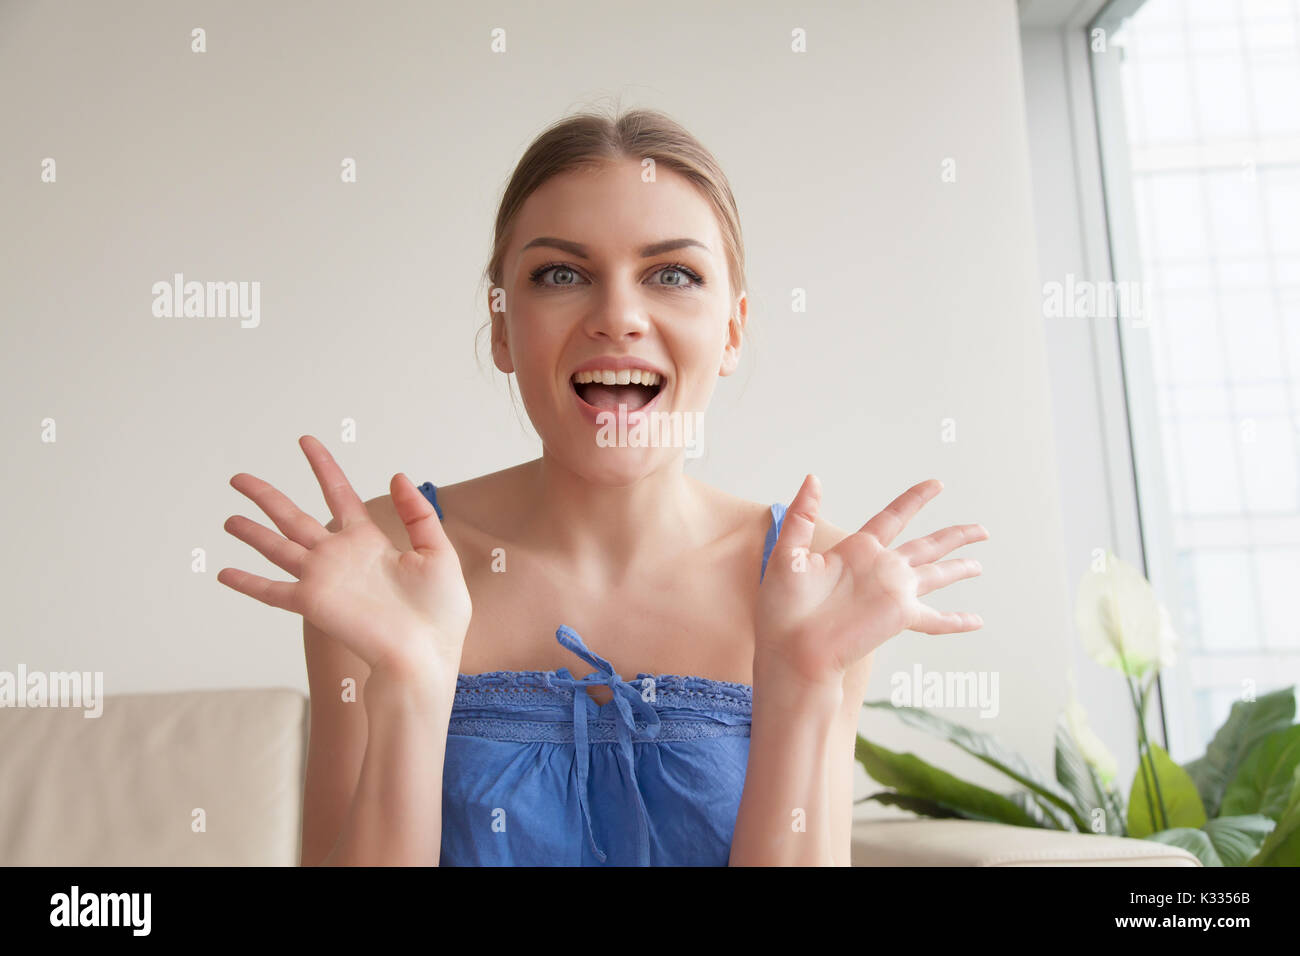 Portrait of excited woman looking at camera Stock Photo